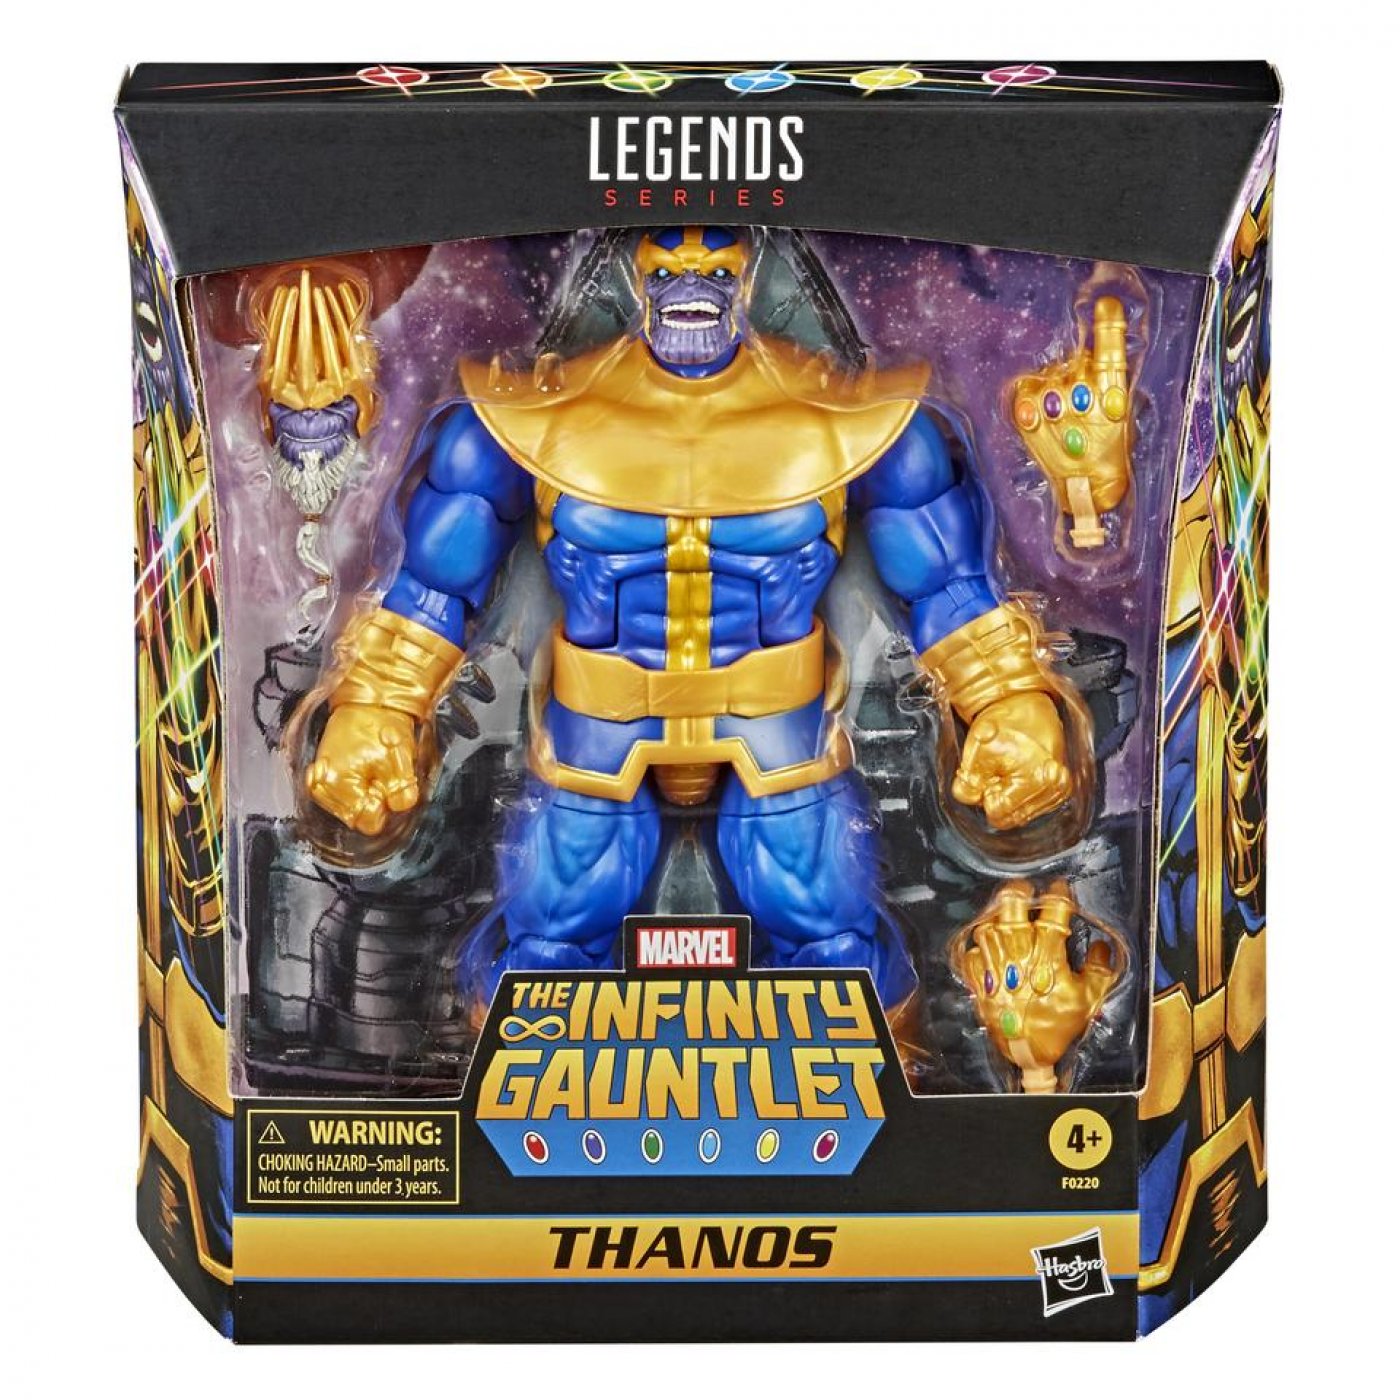 Muñeco Thanos Marvel The Infinity Guantlet Legends Series